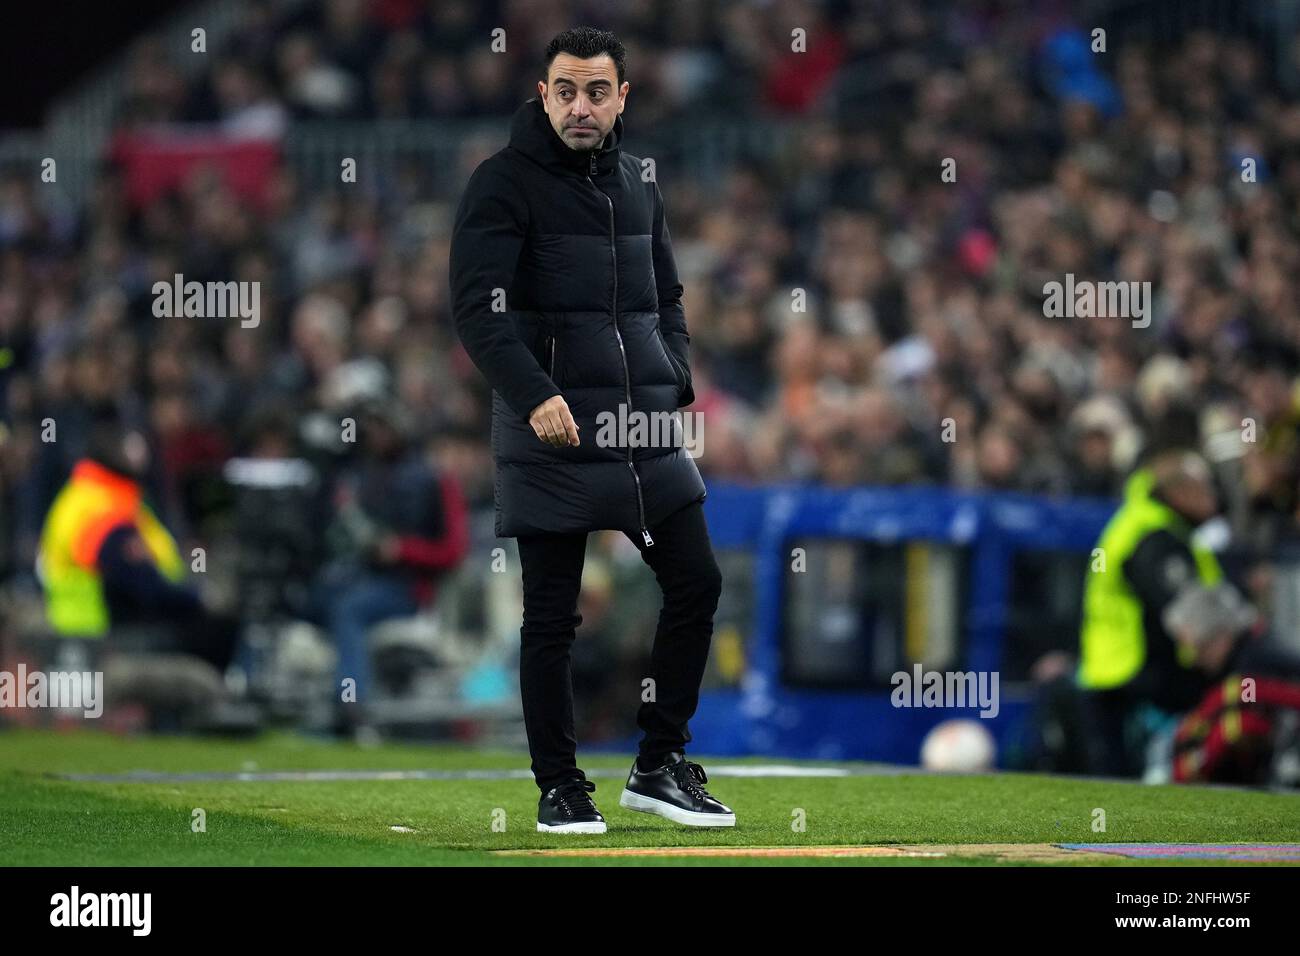 FC Barcelona head coach Xavi Hernandez during the La Liga match between FC Barcelona and Manchester United played at Spotify Camp Nou Stadium on February 16, 2023 in Barcelona, Spain. (Photo by Sergio Ruiz / PRESSIN) Stock Photo